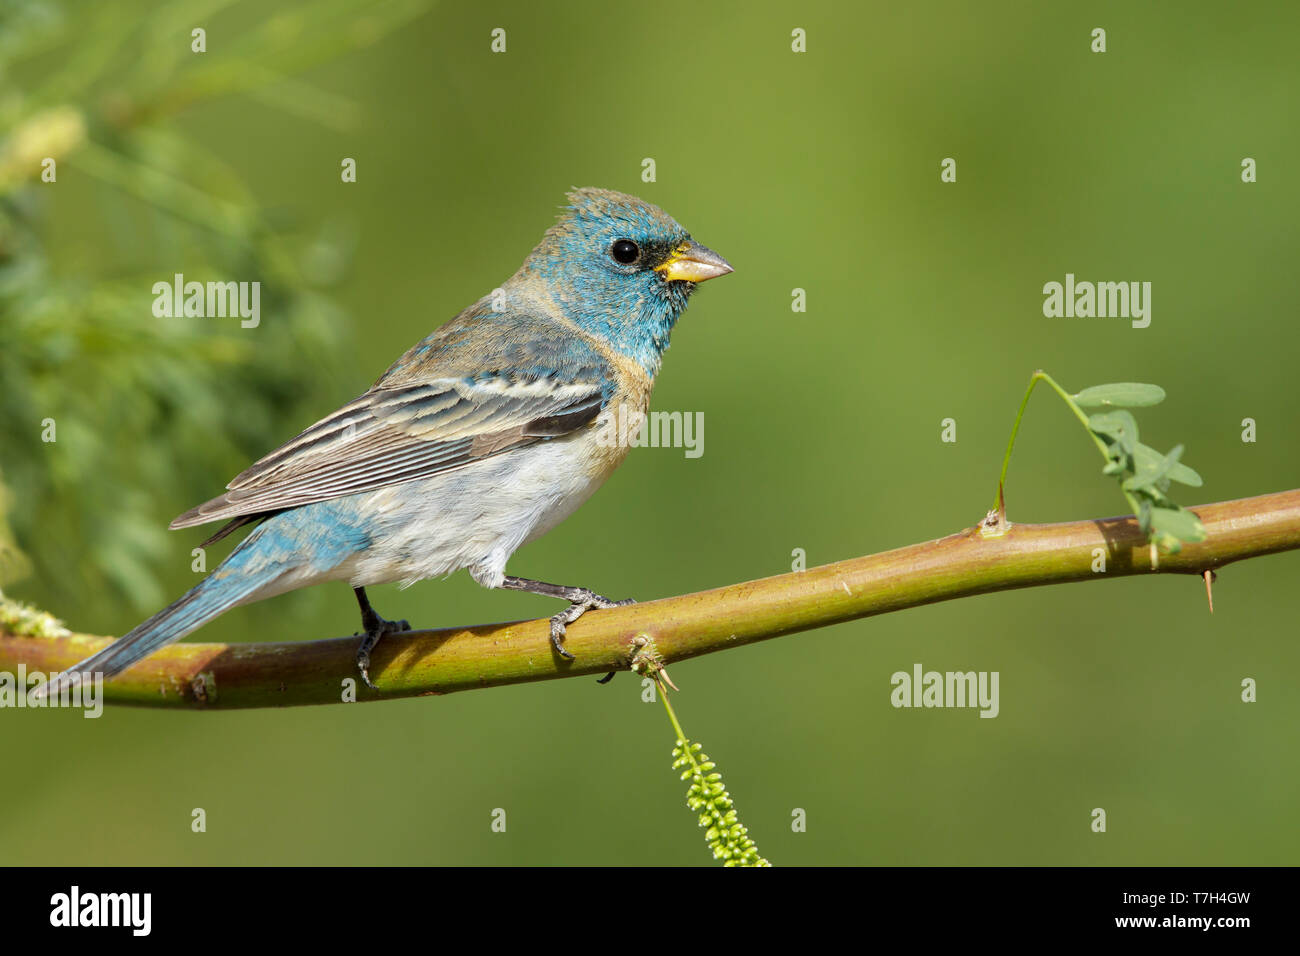 Adult male Lazuli Bunting (Passerina amoena) in transition to breeding plumage in Riverside County in California. Perched on a twig during spring. Stock Photo